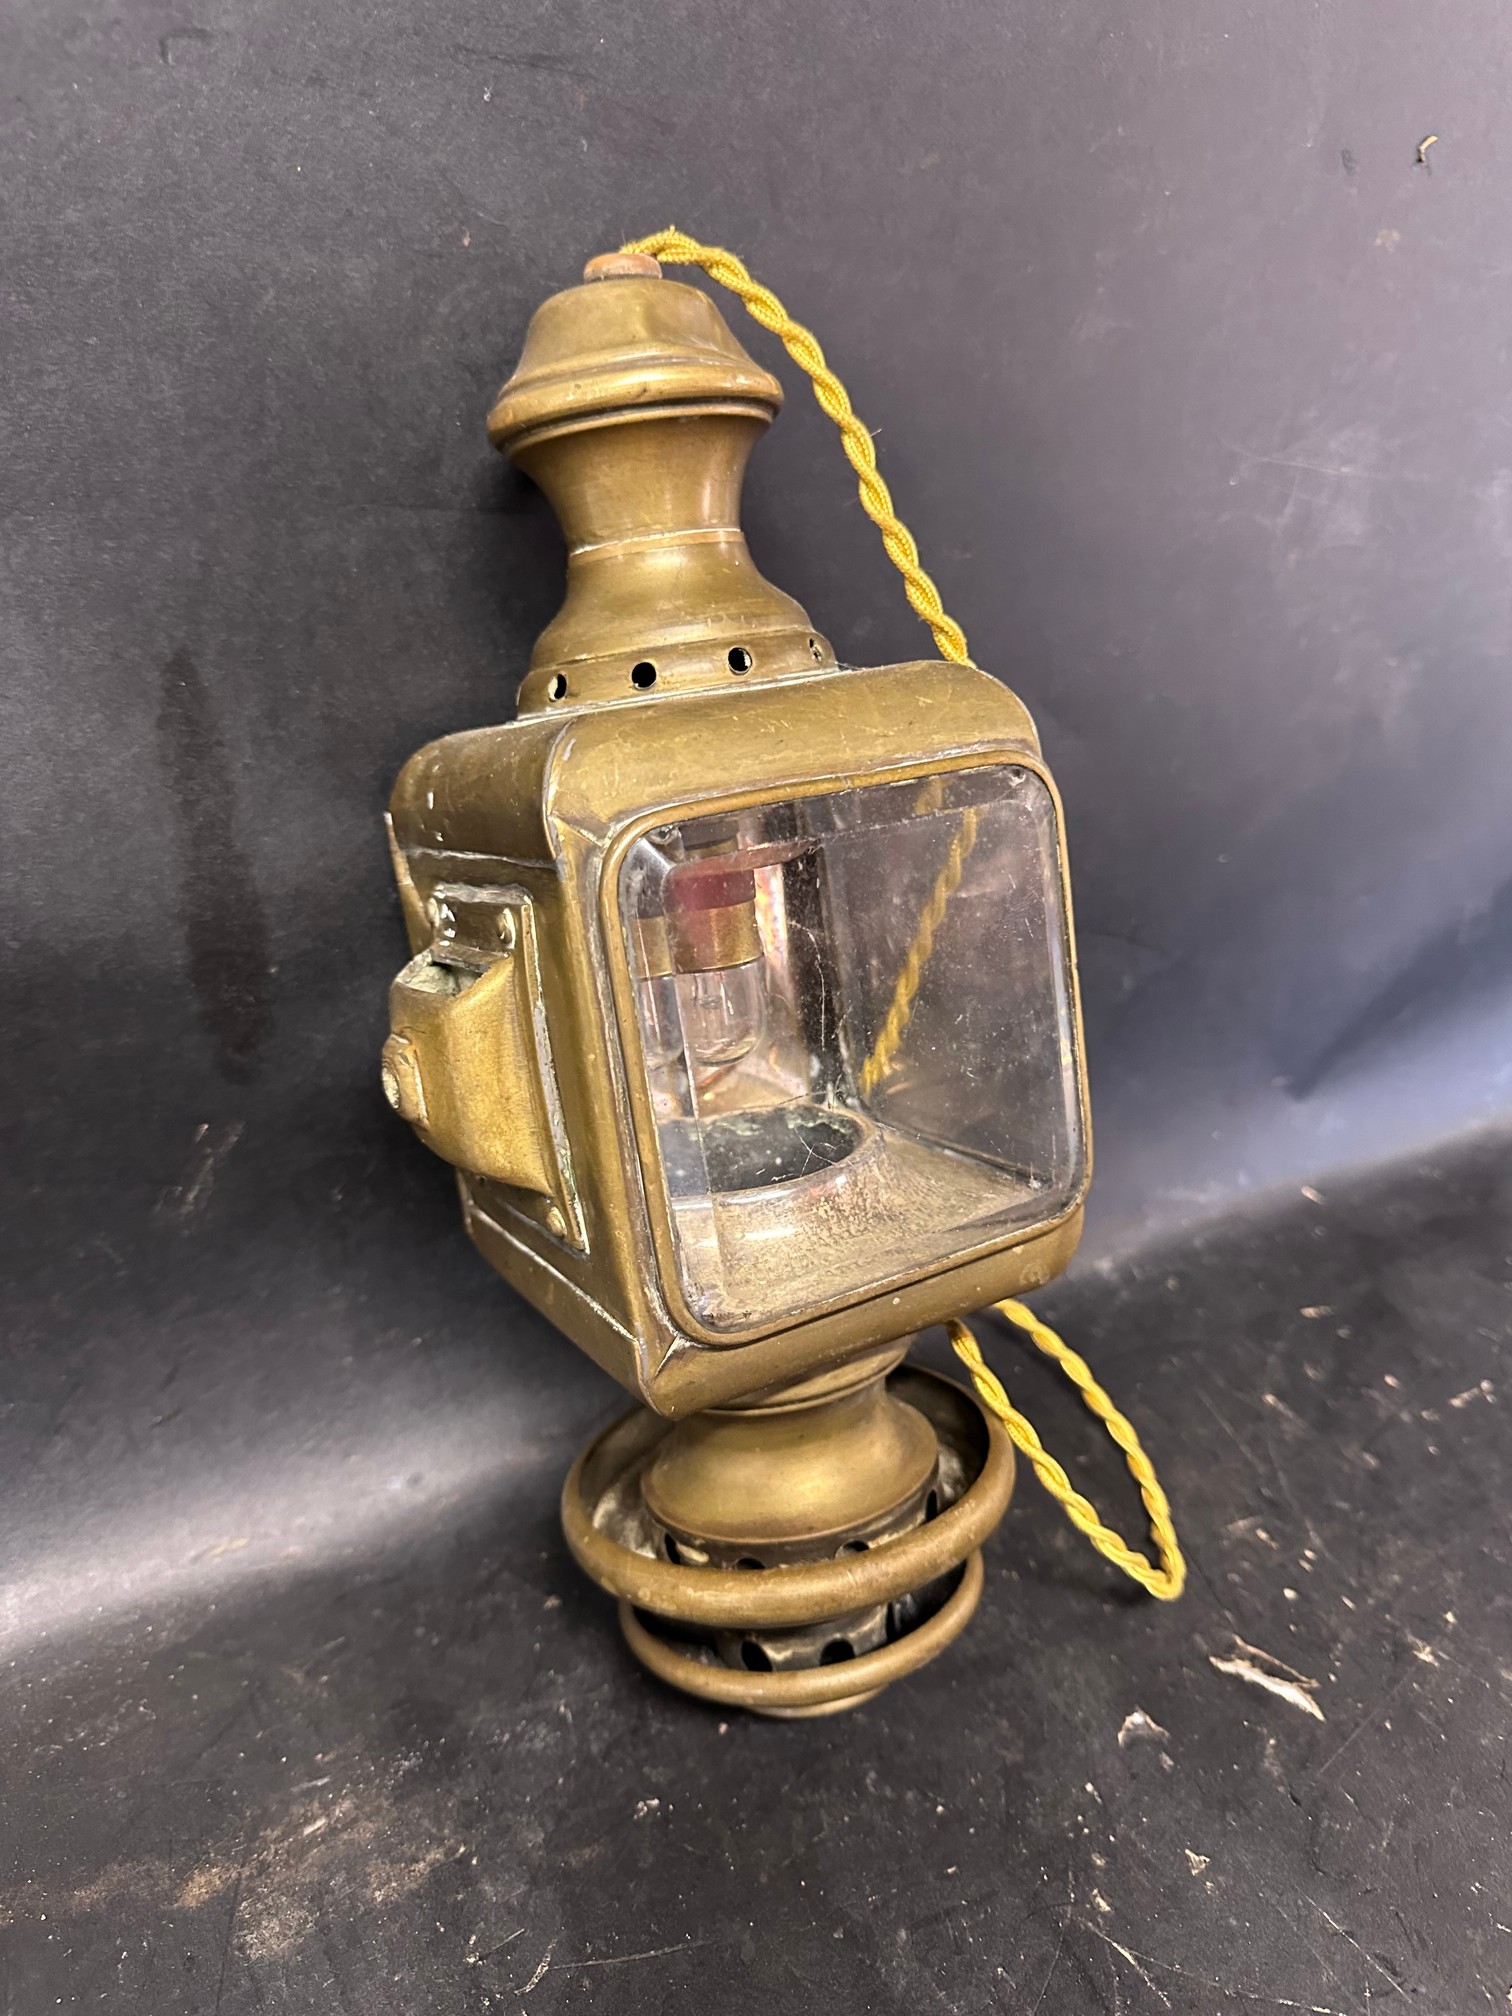 A Linx French coach lamp, converted for electric use.